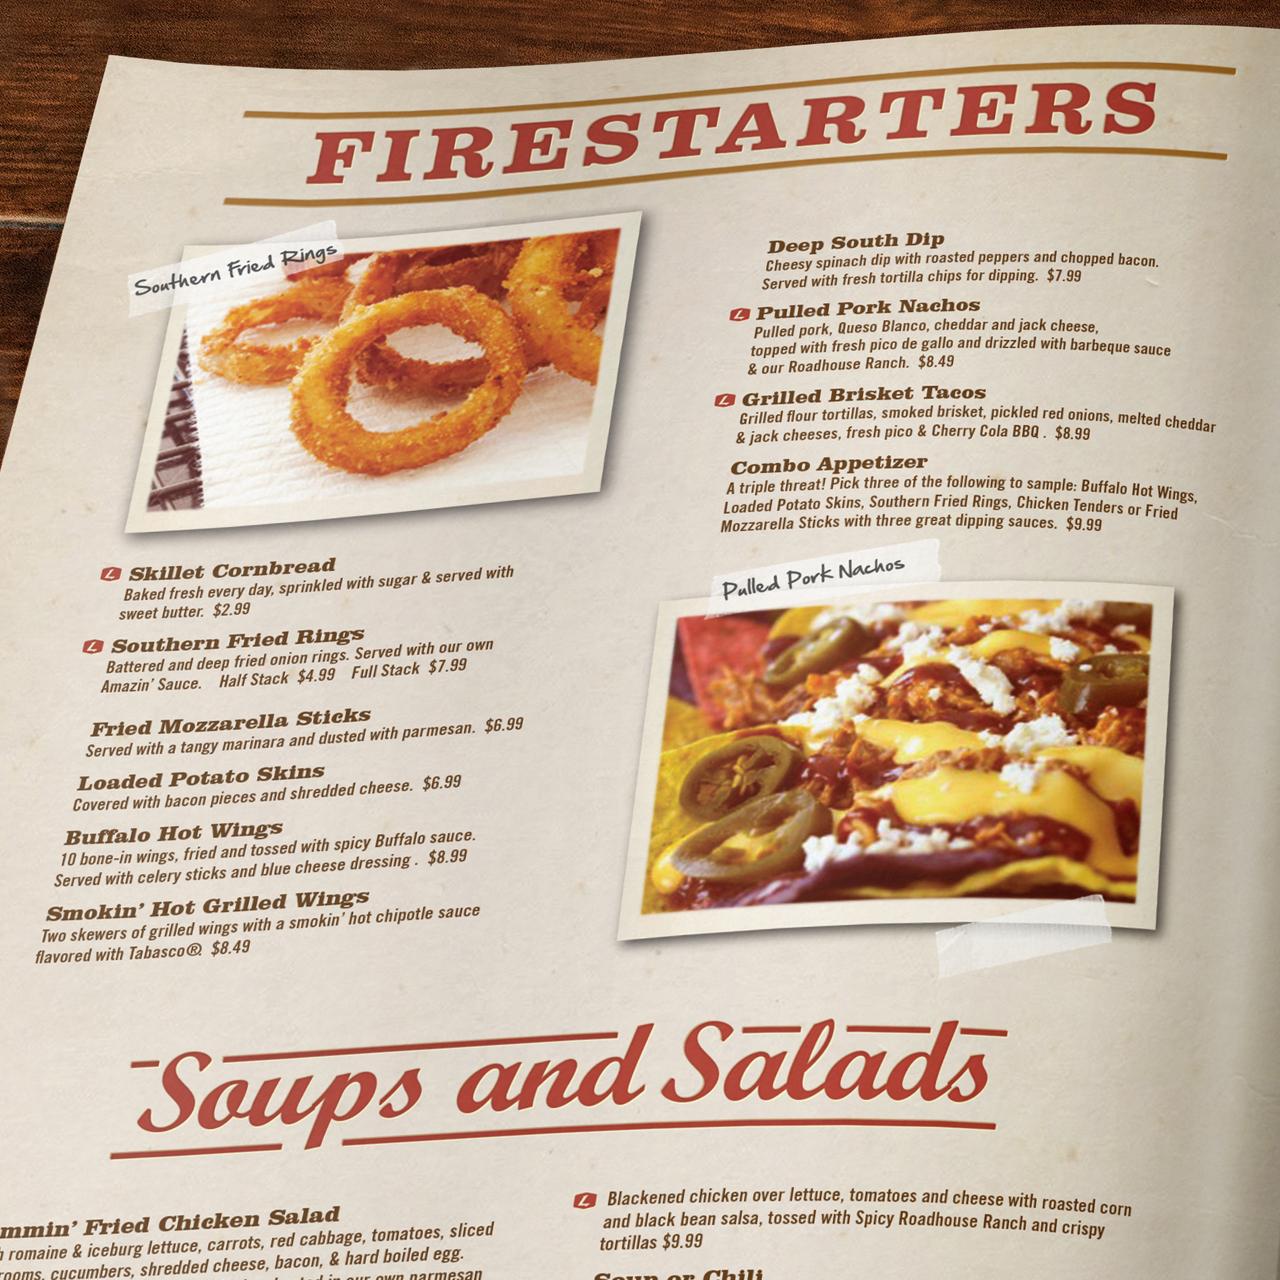 An image of the Starters page design for the Logan's Roadhouse menu